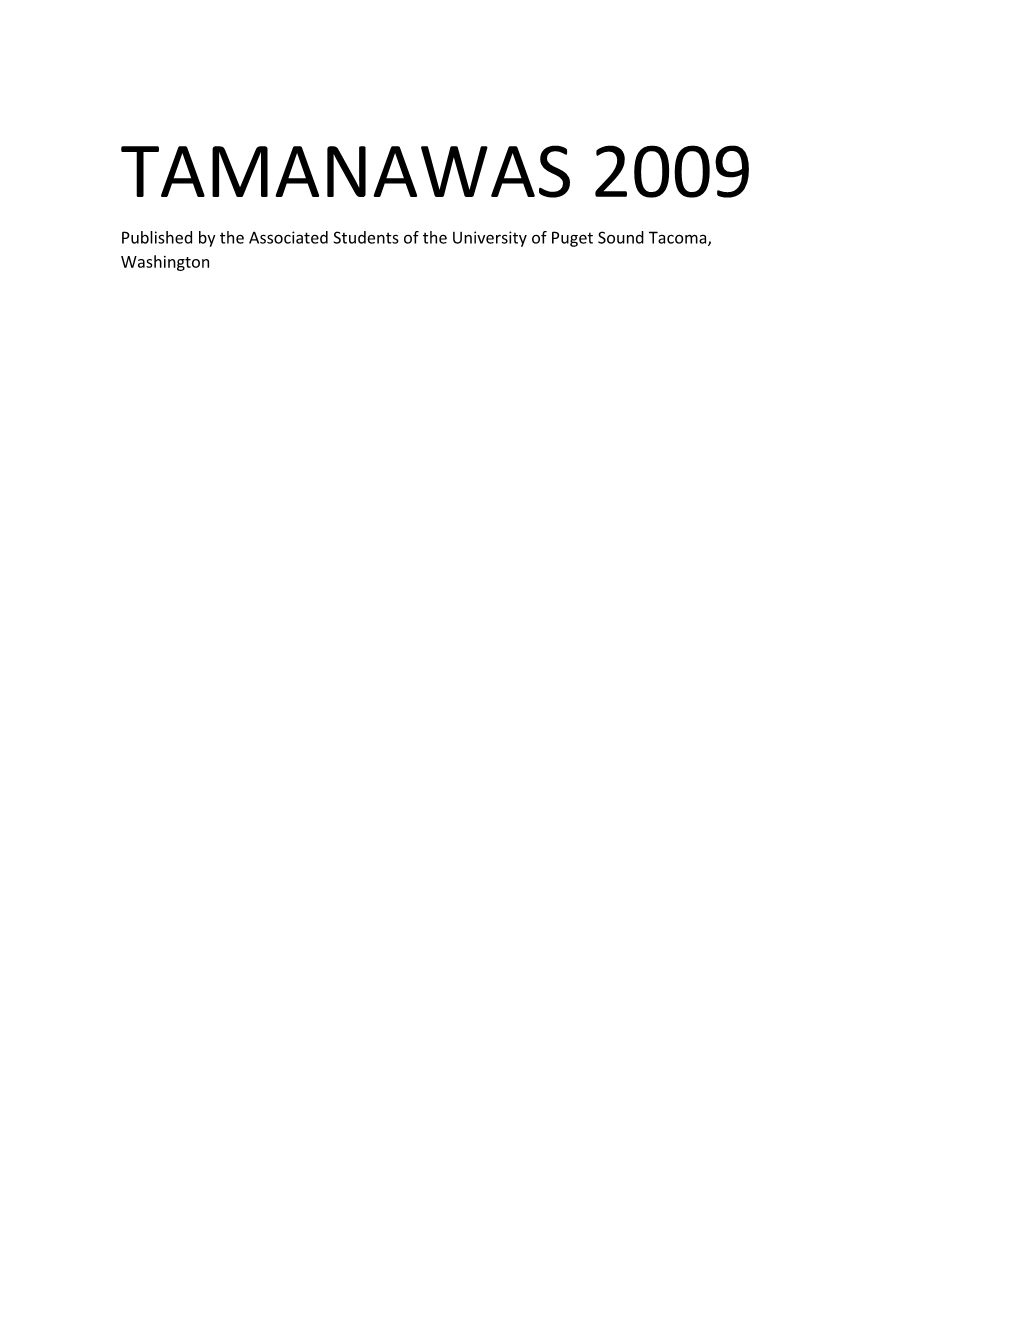 TAMANAWAS 2009 Published by the Associated Students of the University of Puget Sound Tacoma, Washington